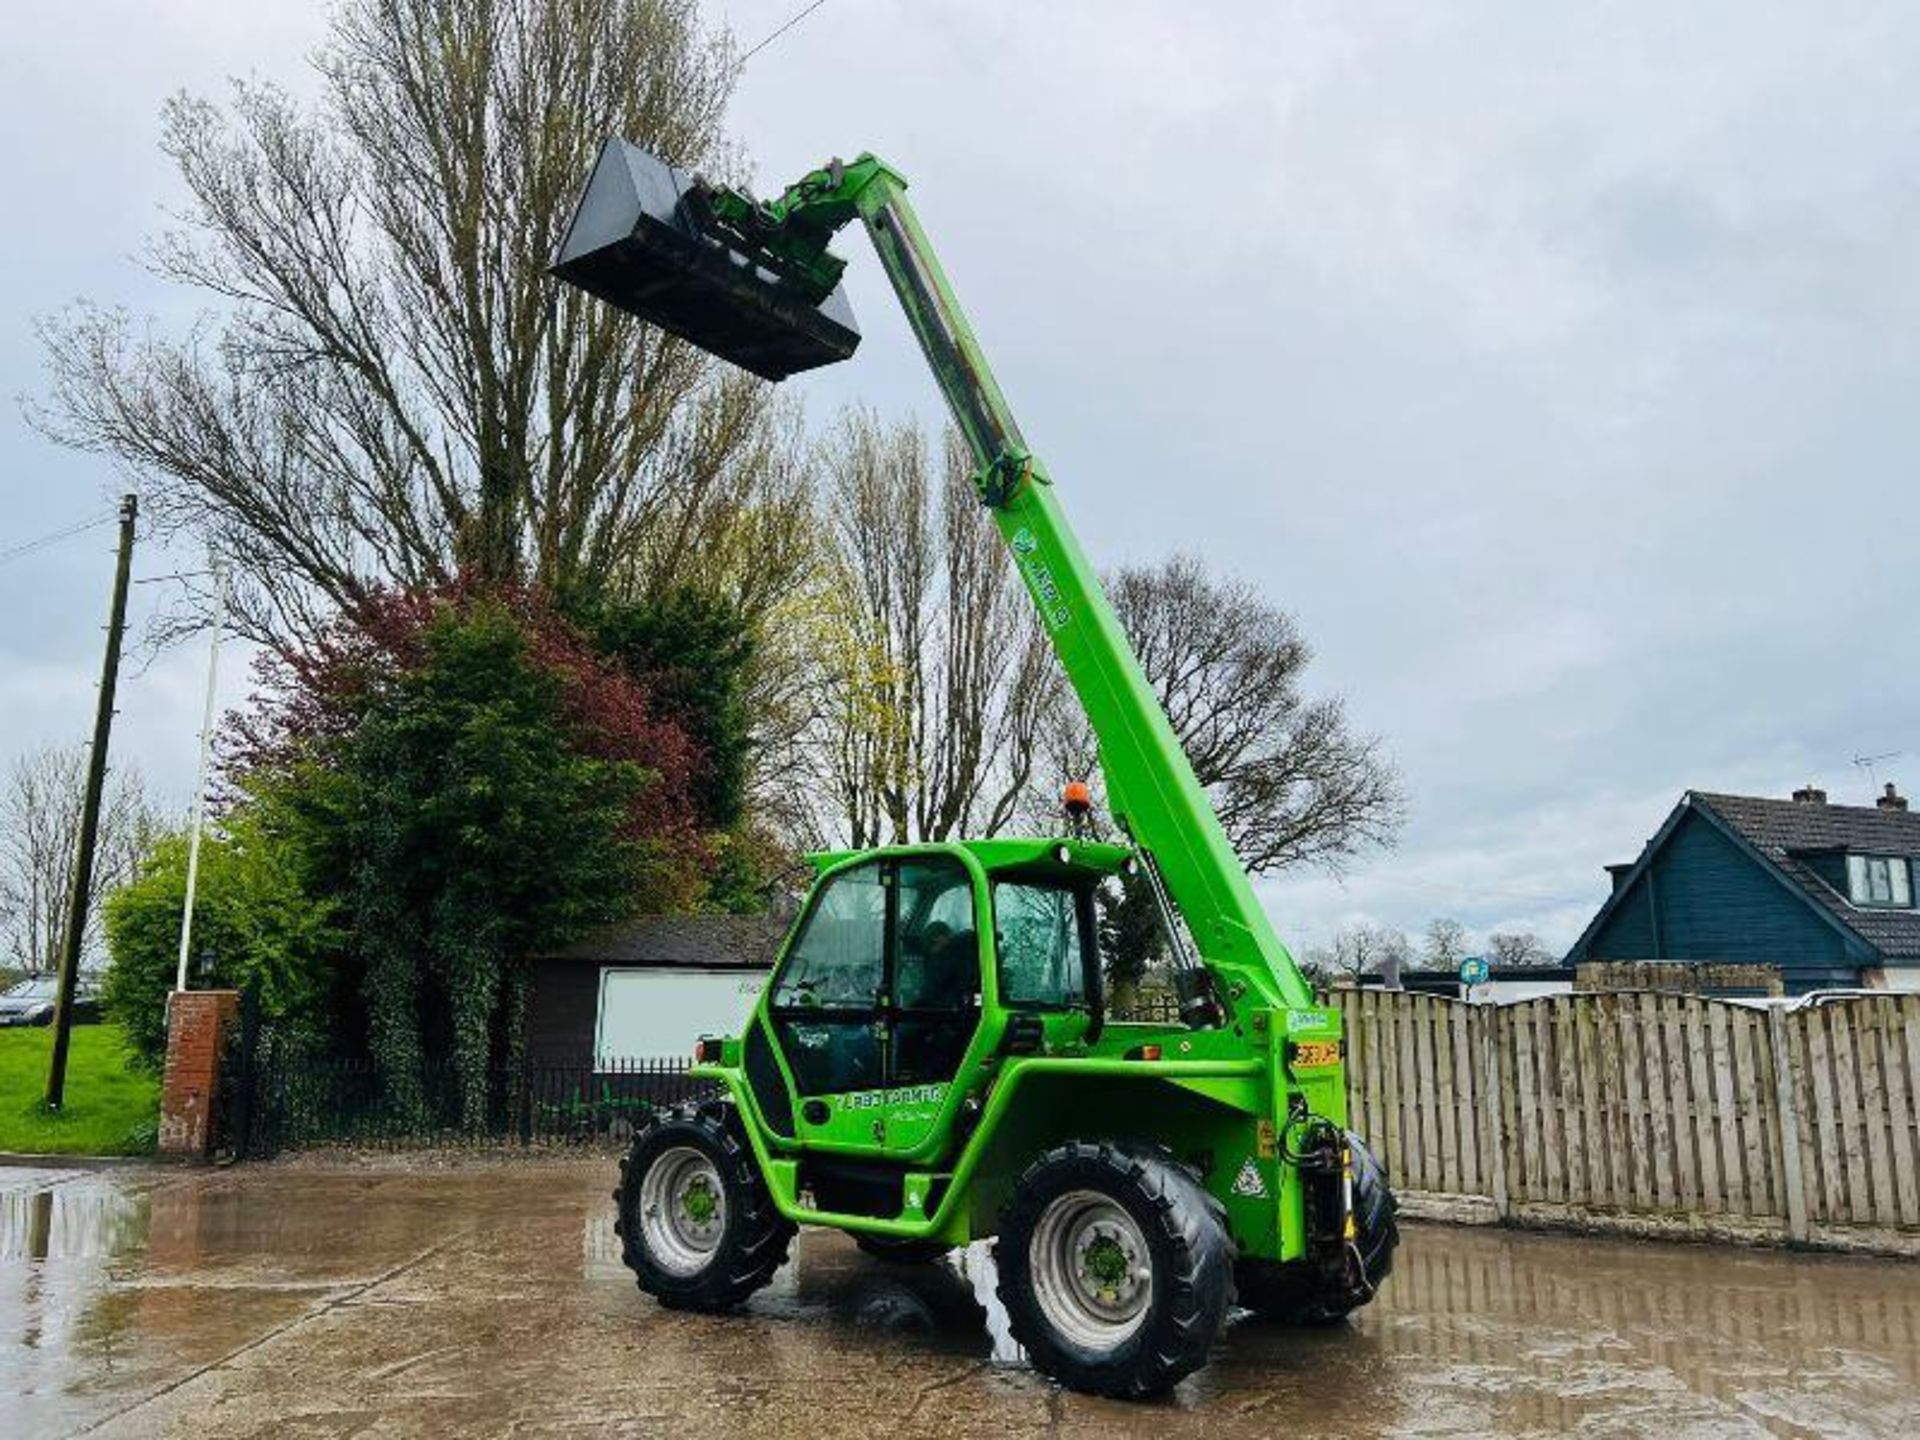 MERLO P34.7 4WD TELEHANDLER*YEAR 2013, AG SPEC* C/W PICK UP HITCH - Image 2 of 20